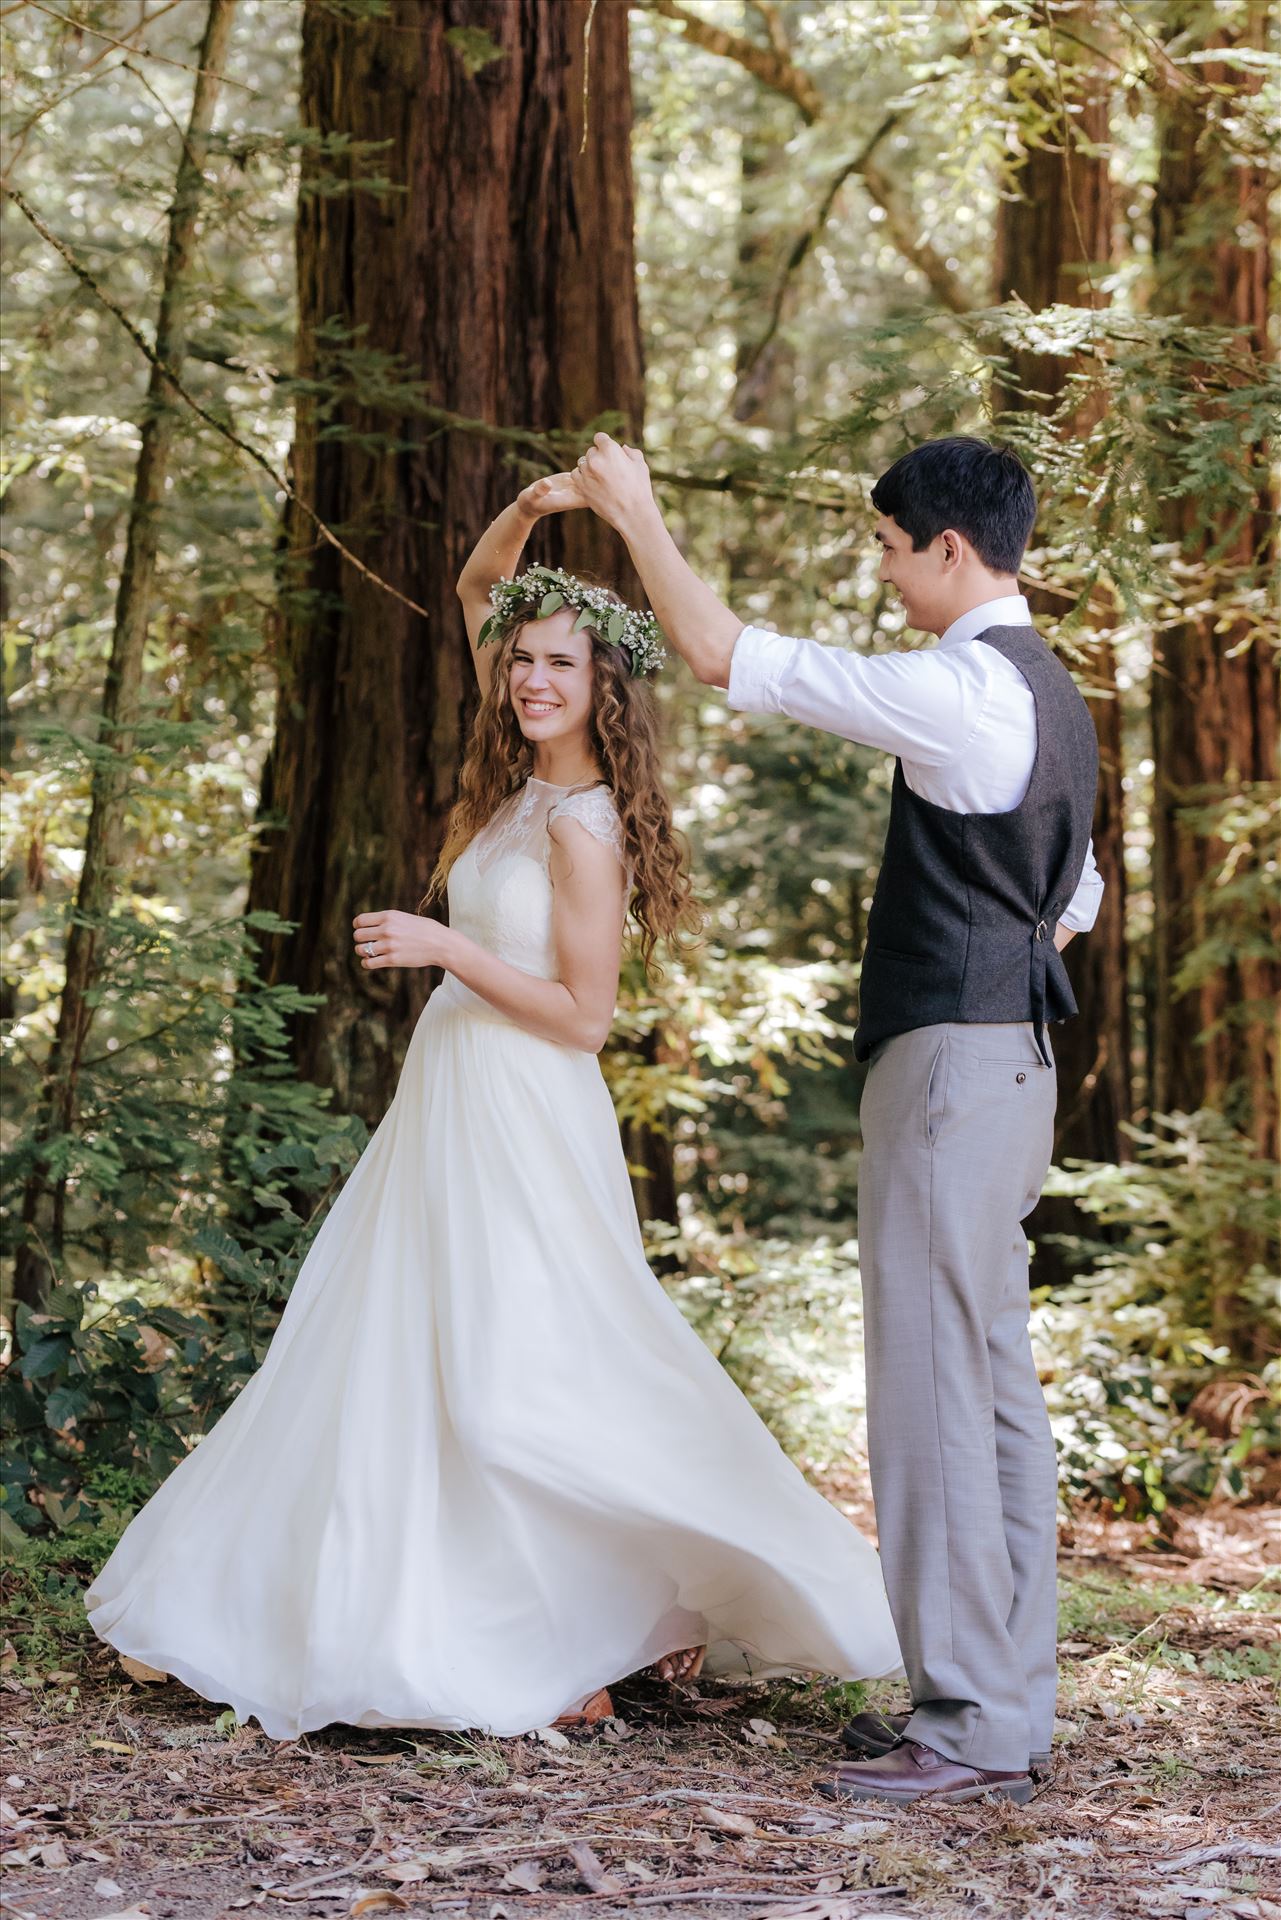 FW-6667.JPG Mt Madonna wedding in the redwoods outside of Watsonville, California with a romantic and classic vibe by sarah williams of mirror's edge photography a san luis obispo wedding photographer.  Bride and Groom dancing in the forest by Sarah Williams